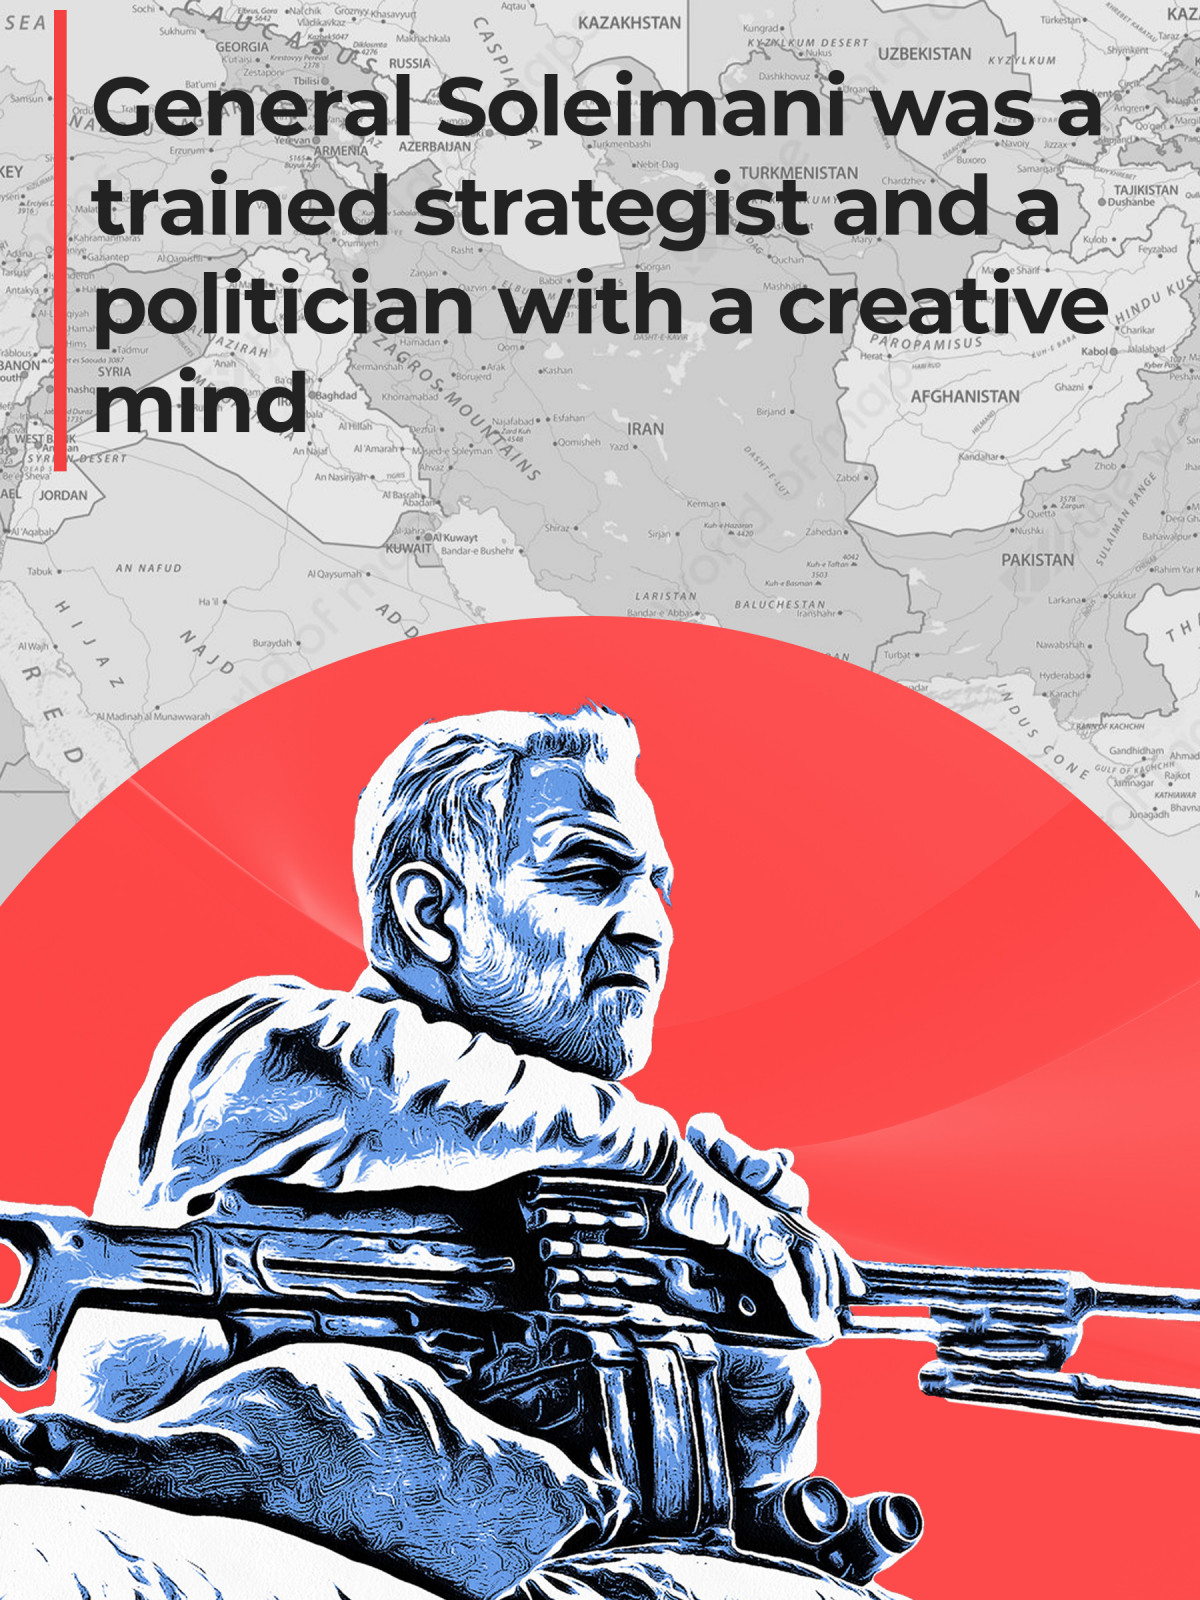 General Soleimani was a trained strategist and a politician with a creative mind